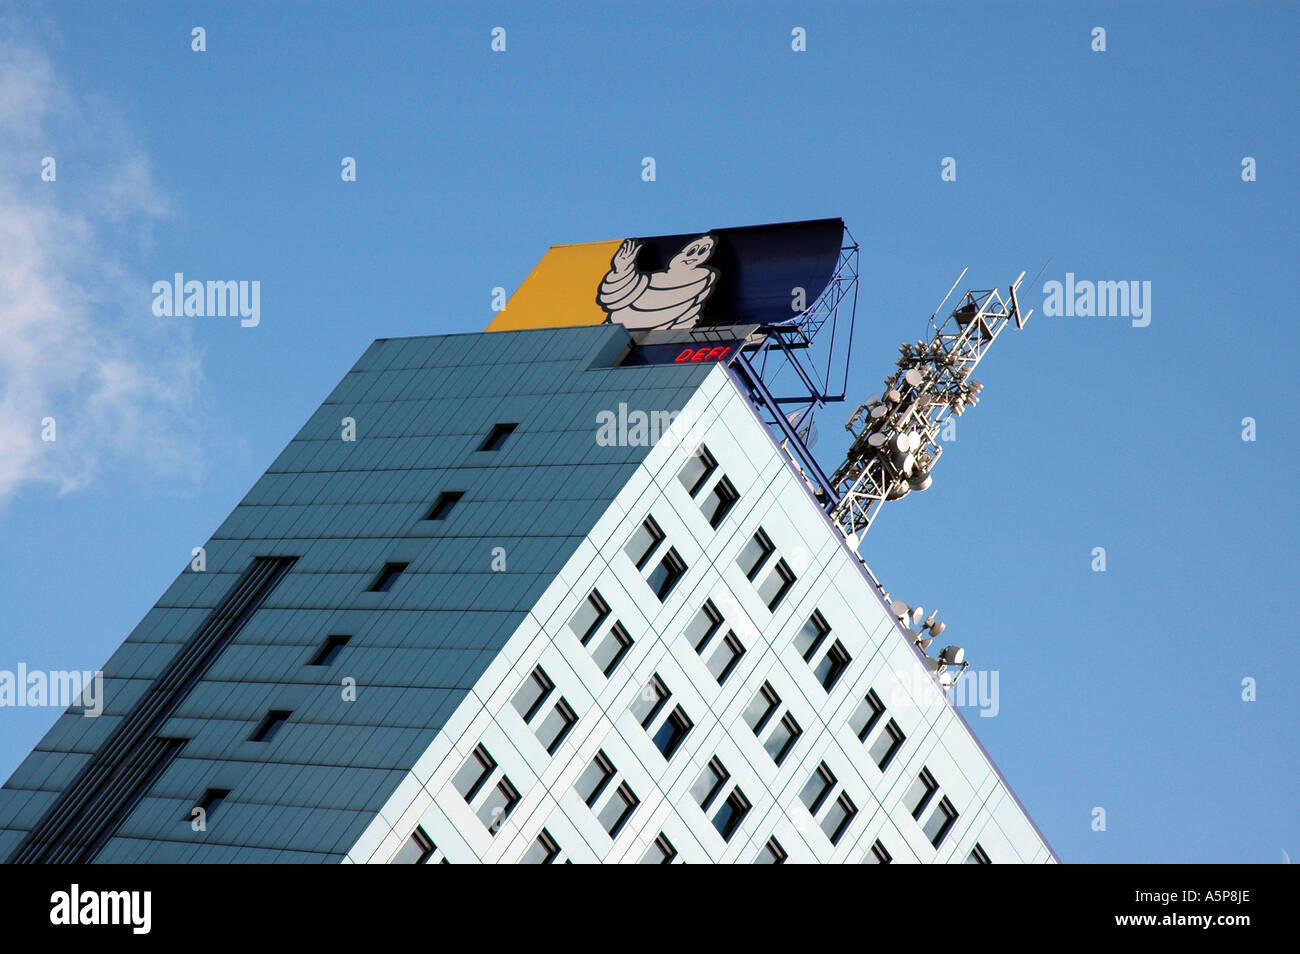 Michelin Corporate billboard on the top of the building in Warsaw Stock Photo